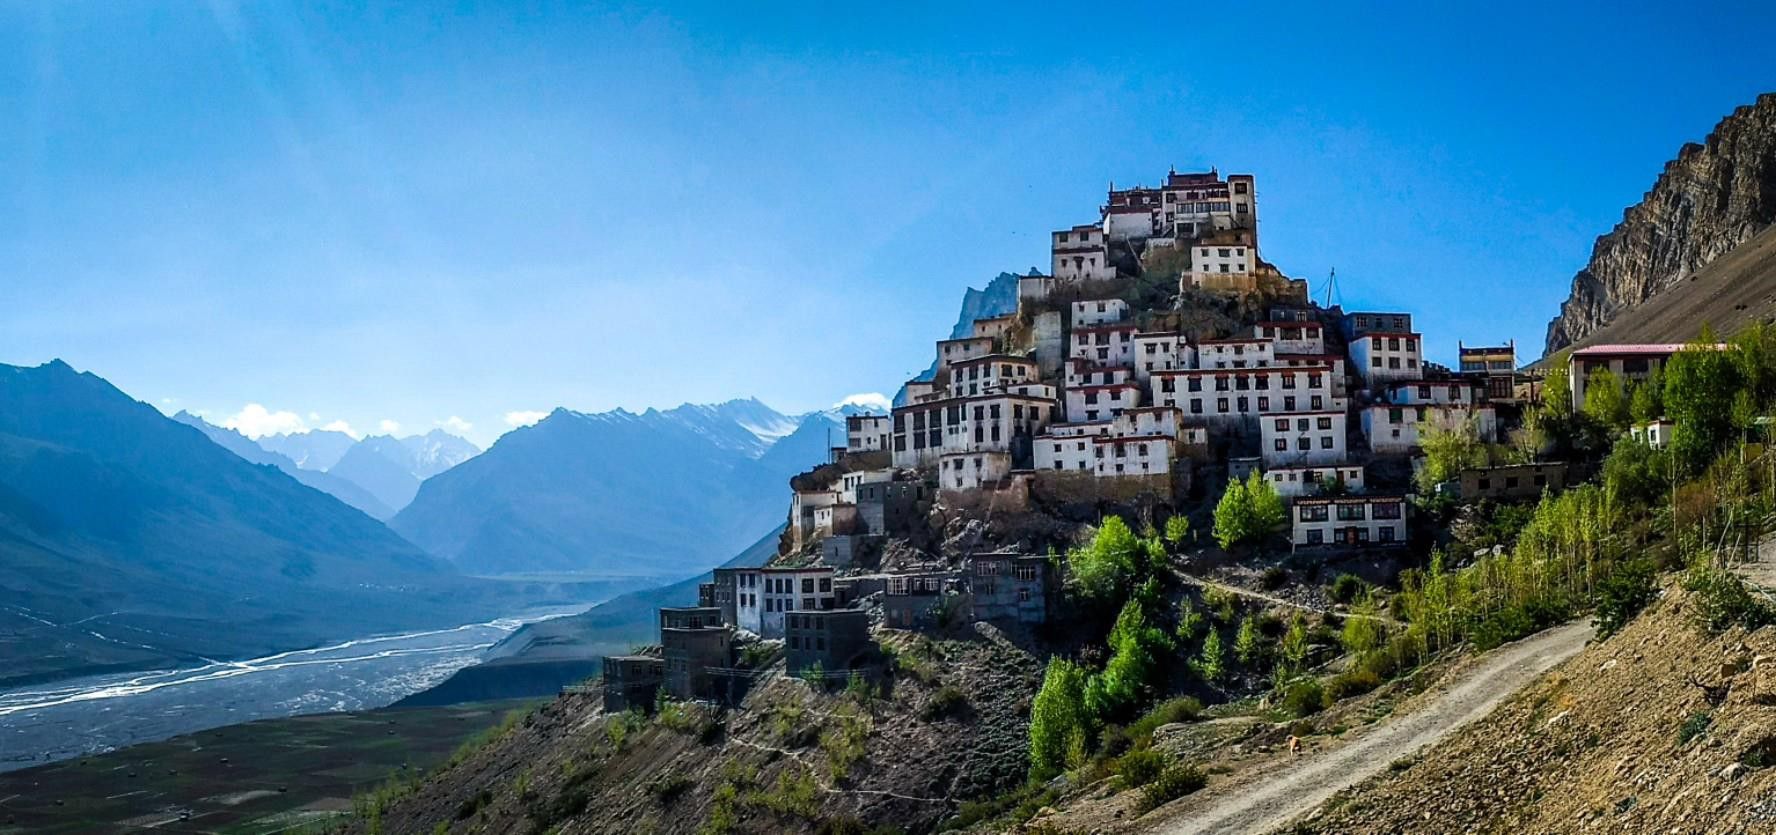 A visit to Spiti Valley